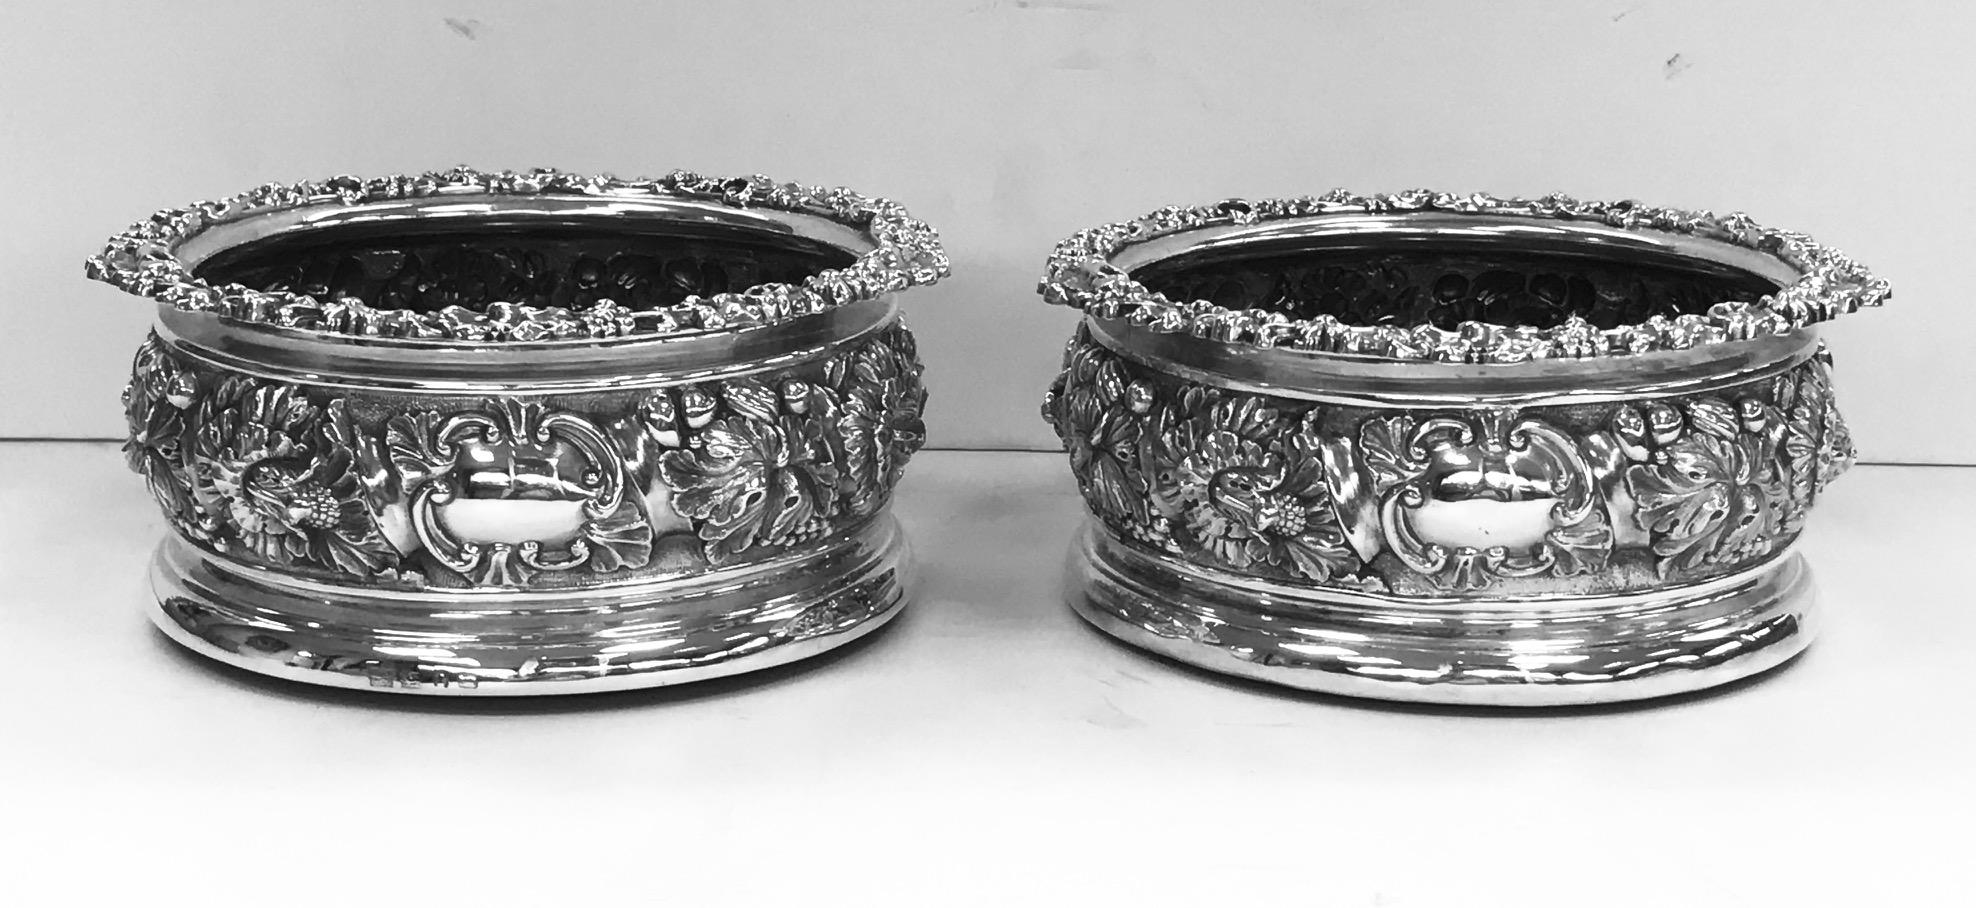 A pair of antique English sterling silver wine coasters, each large enough to hold a magnum.
They were made during the reign of George IV by the firm of S.C. Younge, and bear the hallmarks for the city of Sheffield, 1828/29 and
They have traces of